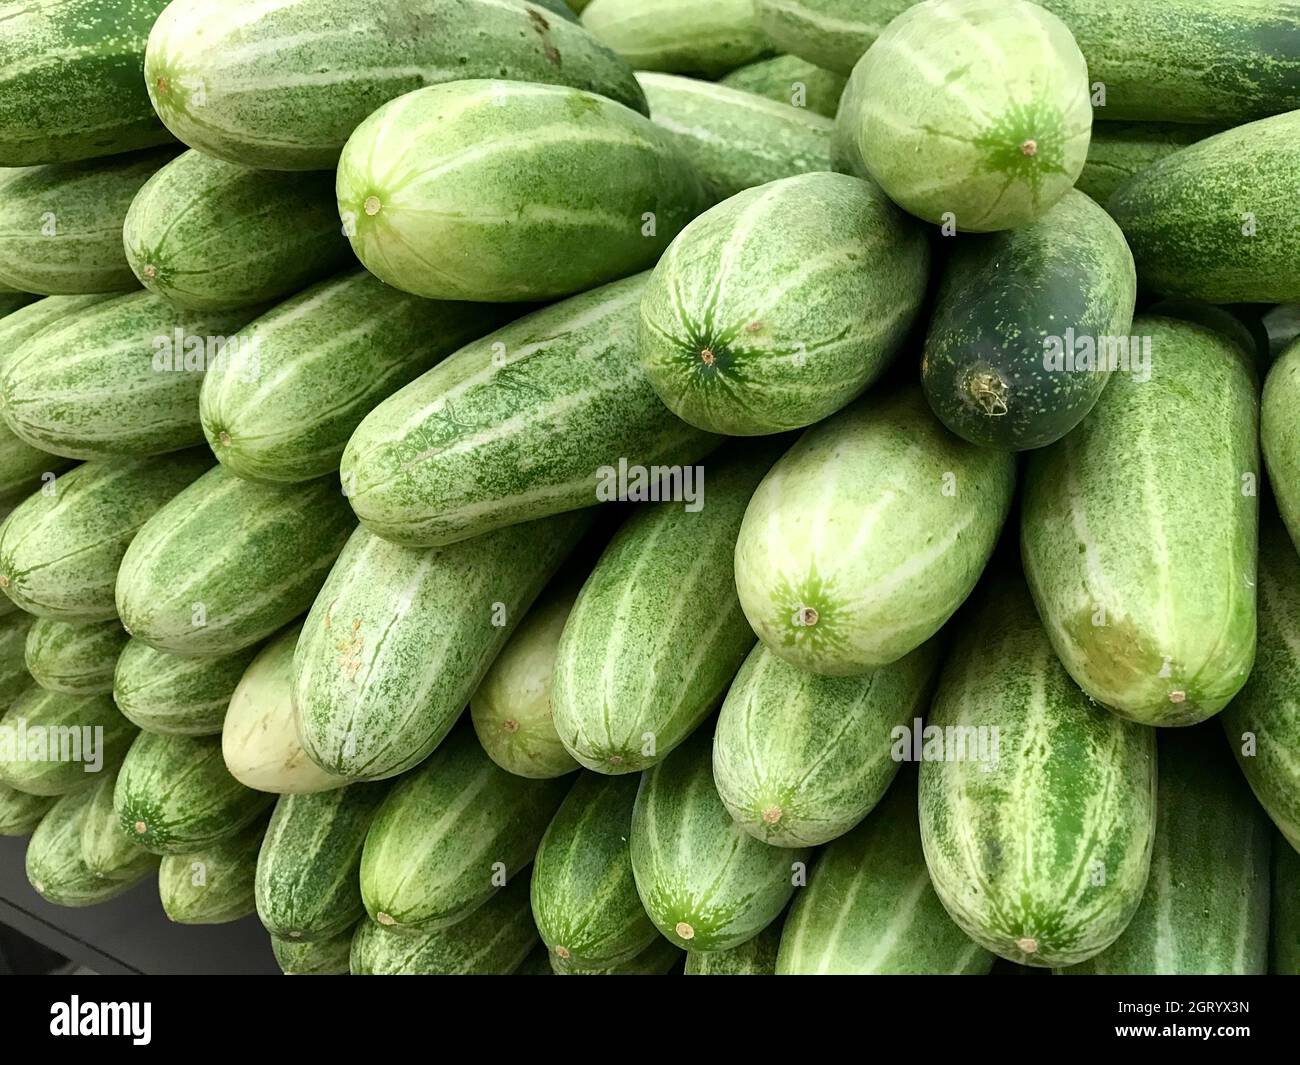 Full Frame Shot Of Cucumber For Sale At Market Stall Stock Photo